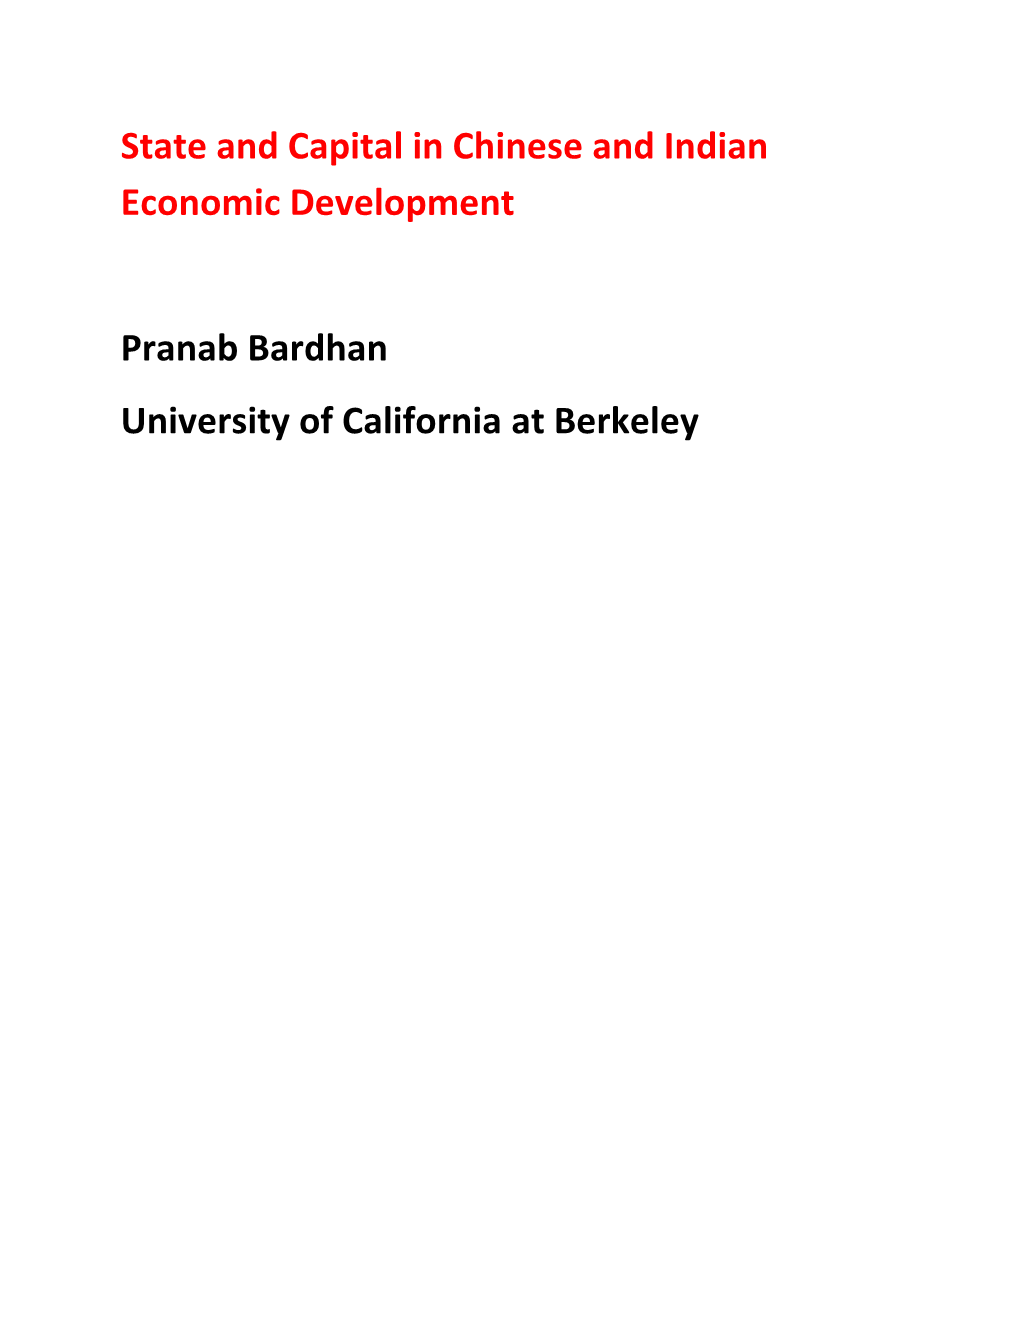 State and Capital in Chinese and Indian Economic Development